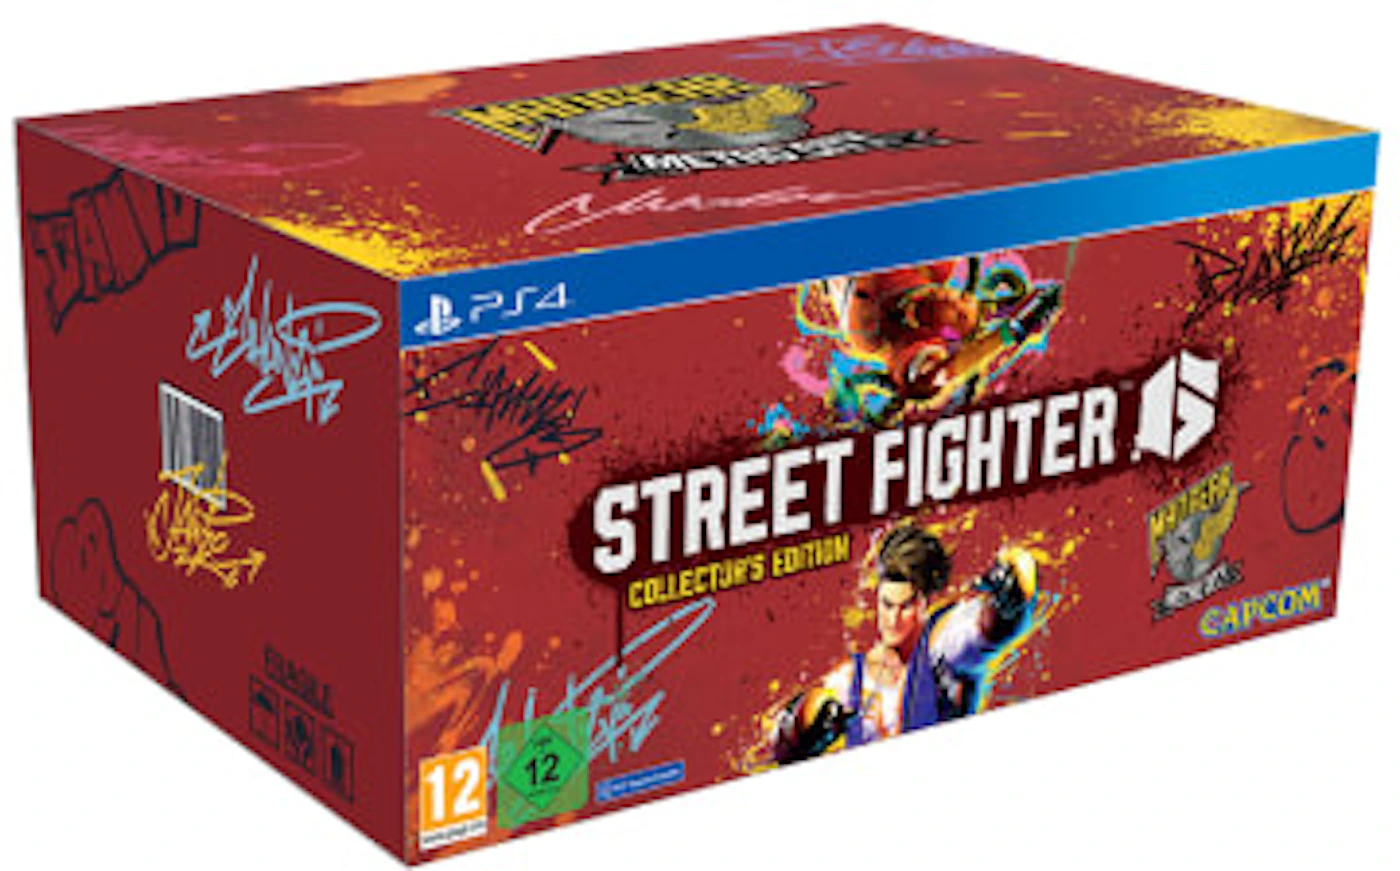 Capcom PS4 Street Fighter 6 Collector's Edition Video Game Bundle - US